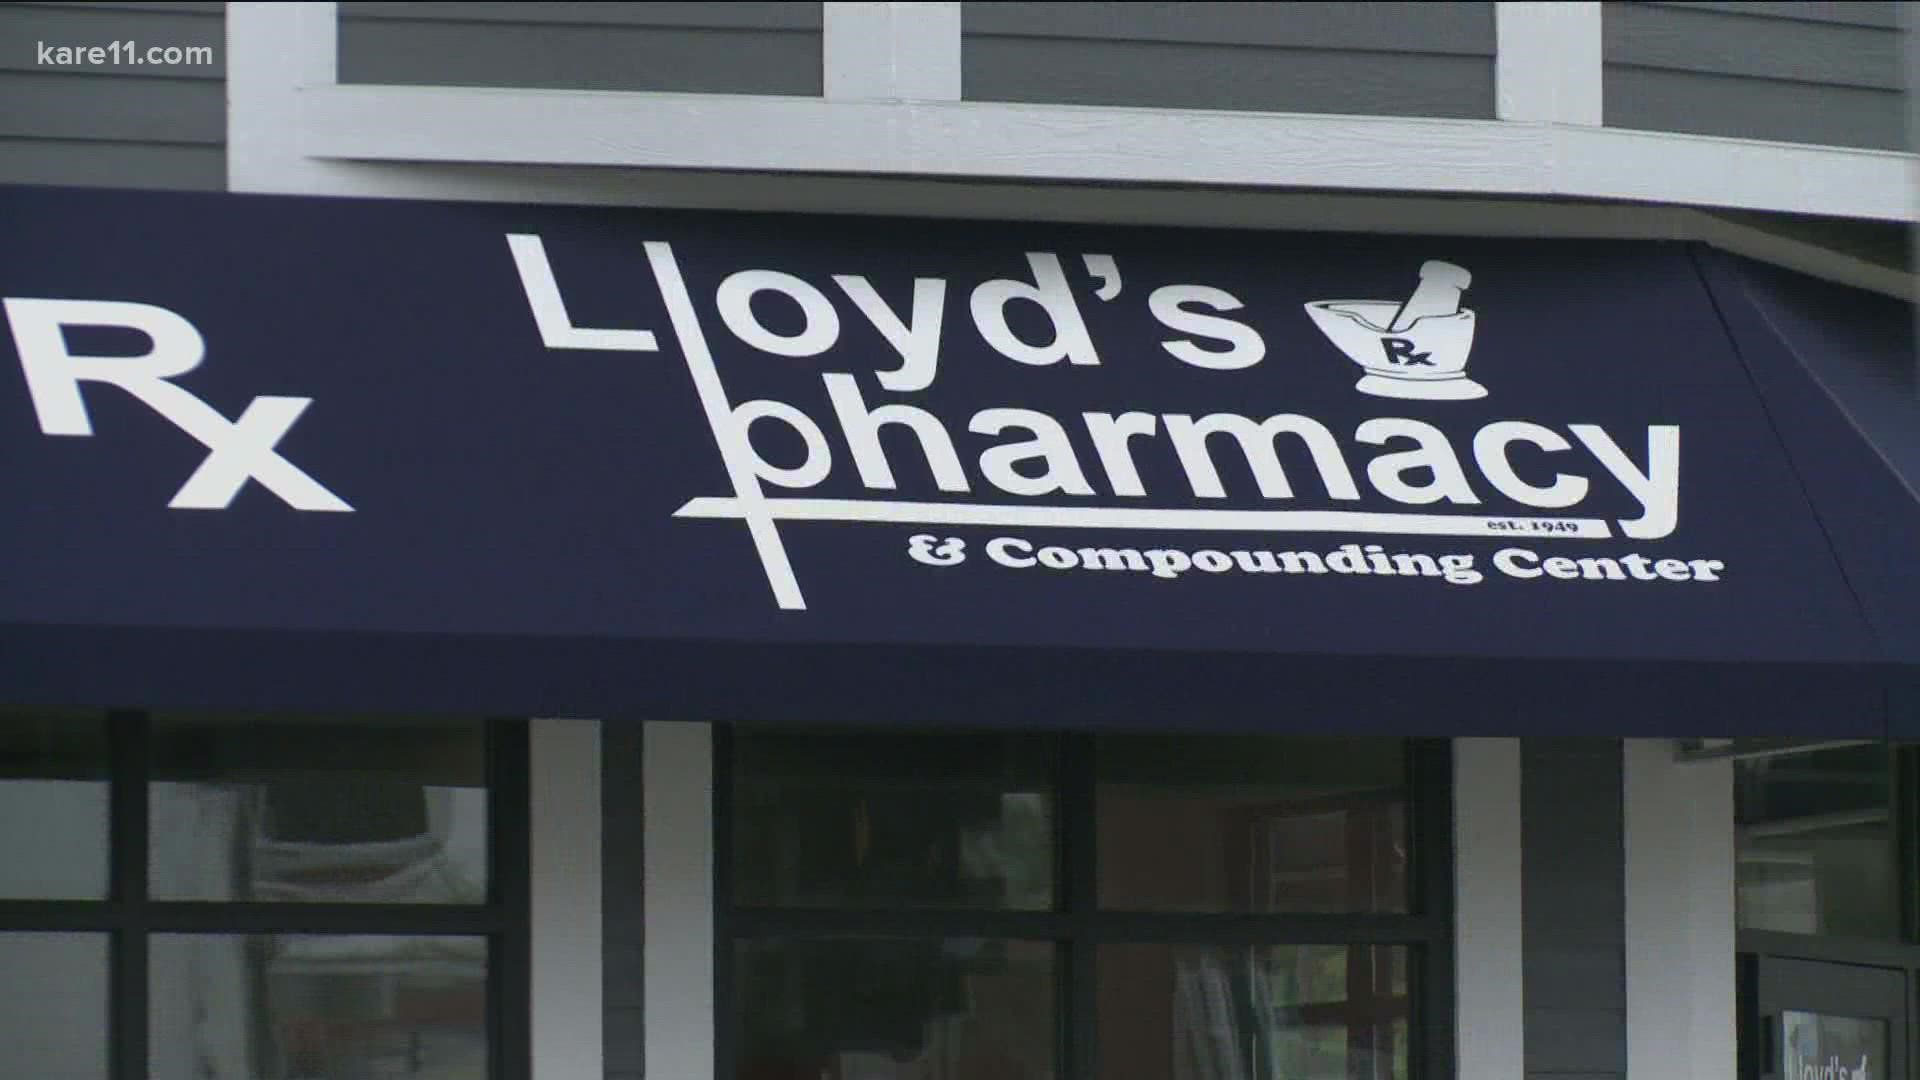 Lloyd's Pharmacy in St. Paul's Midway neighborhood has been part of the community for more than a century.